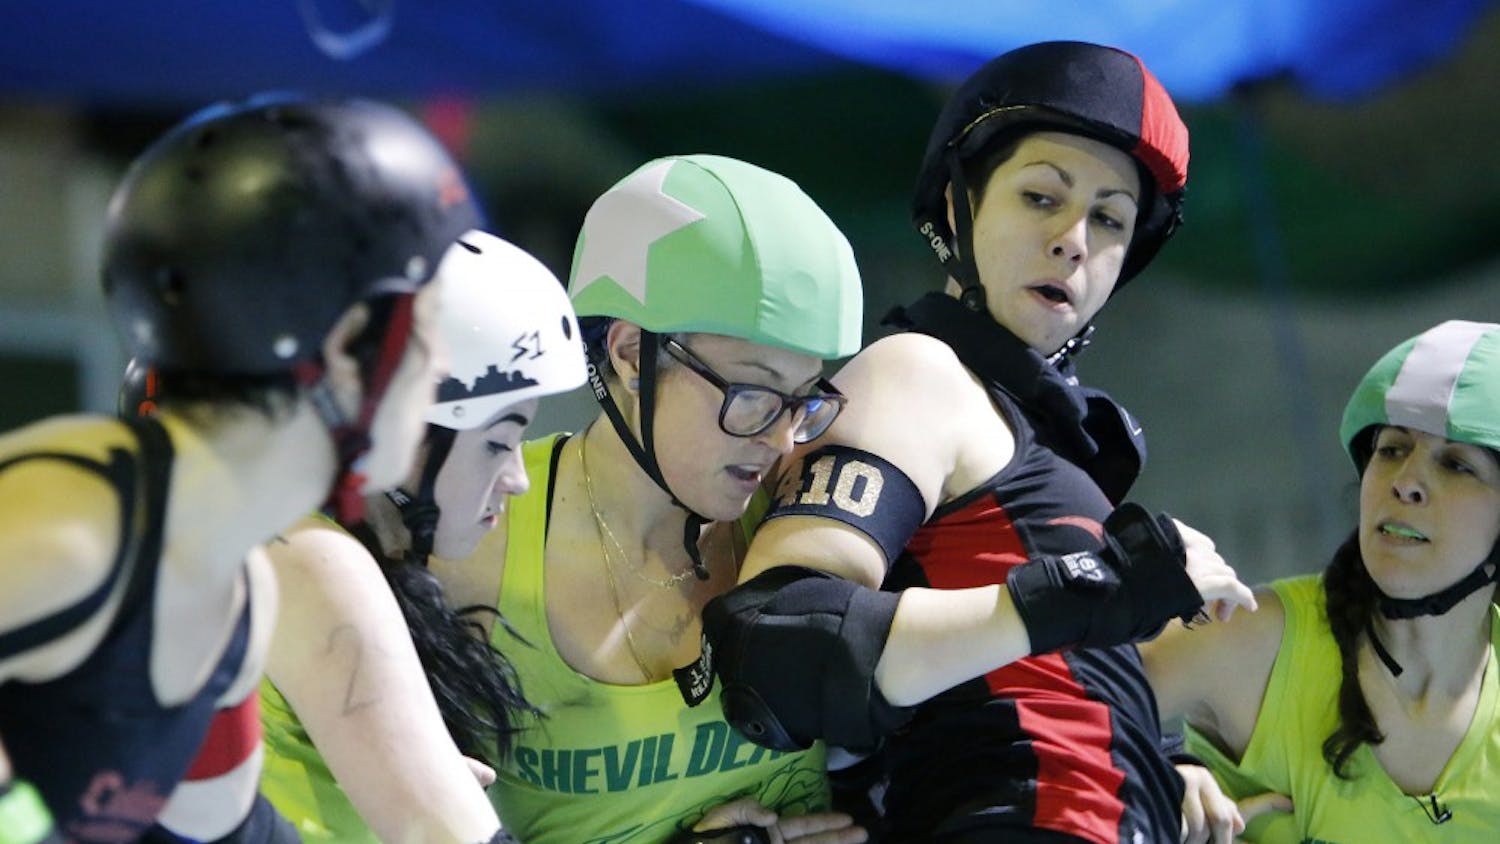 Playing for the San Francisco ShEvil Dead, skater Veronica De La Rosa, known as "Sterling Archer," center, battles for position against the Oakland Outlaws' blockers during scrimmage night on Thursday, Feb. 9, 2017 in Oakland, Calif. Bay Area Derby (BAD) is home of the Berkeley Resistance, Richmond Wrecking Belles, Oakland Outlaws and San Francisco ShEvil Dead and is a full contact women's flat track roller derby league in Oakland. (Josie Lepe/Bay Area News Group/TNS)